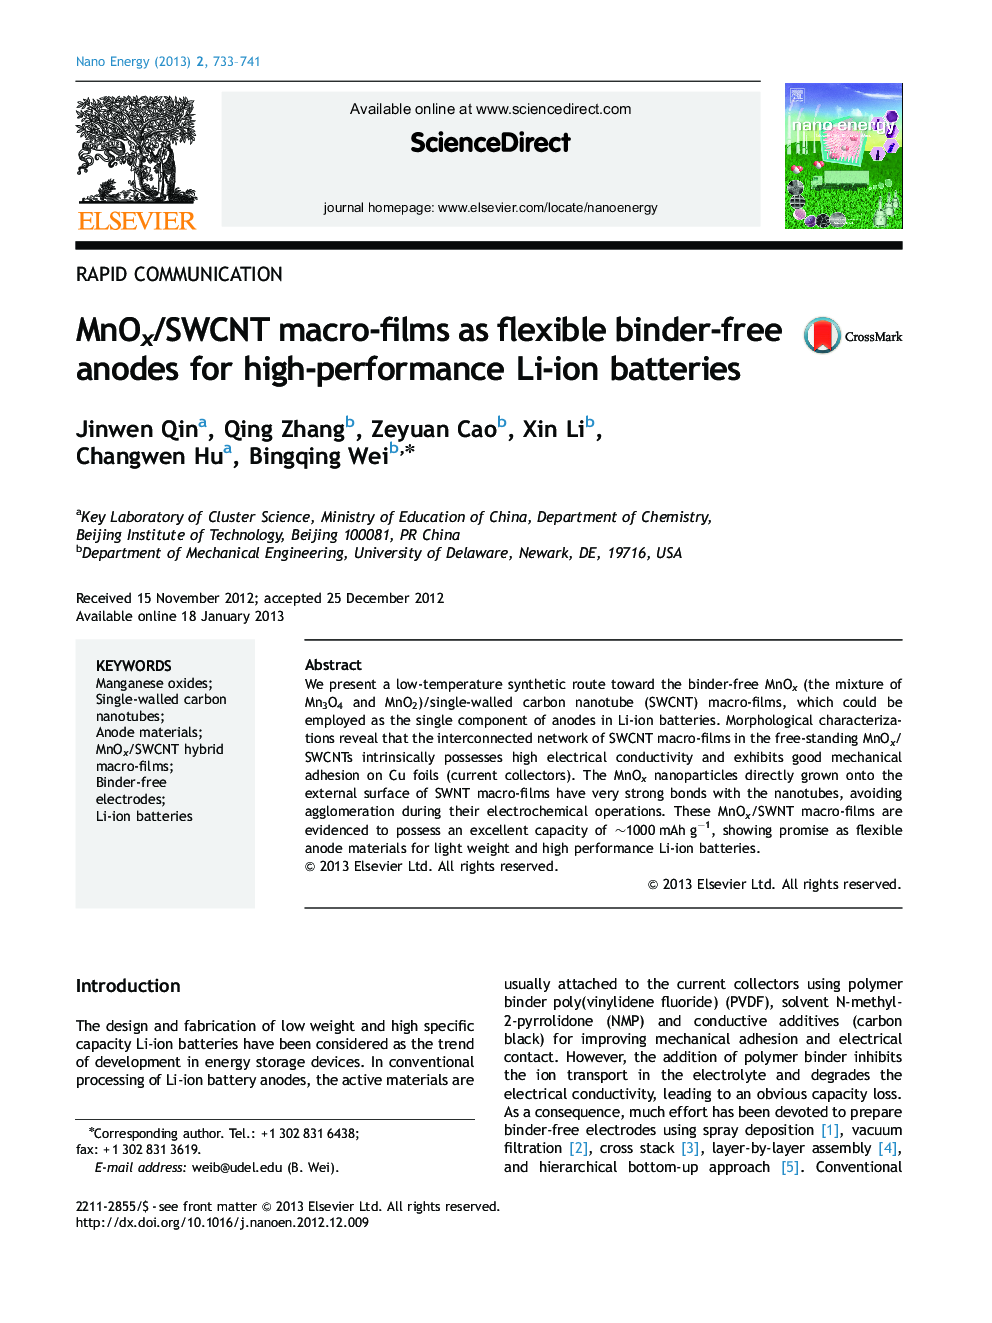 MnOx/SWCNT macro-films as flexible binder-free anodes for high-performance Li-ion batteries